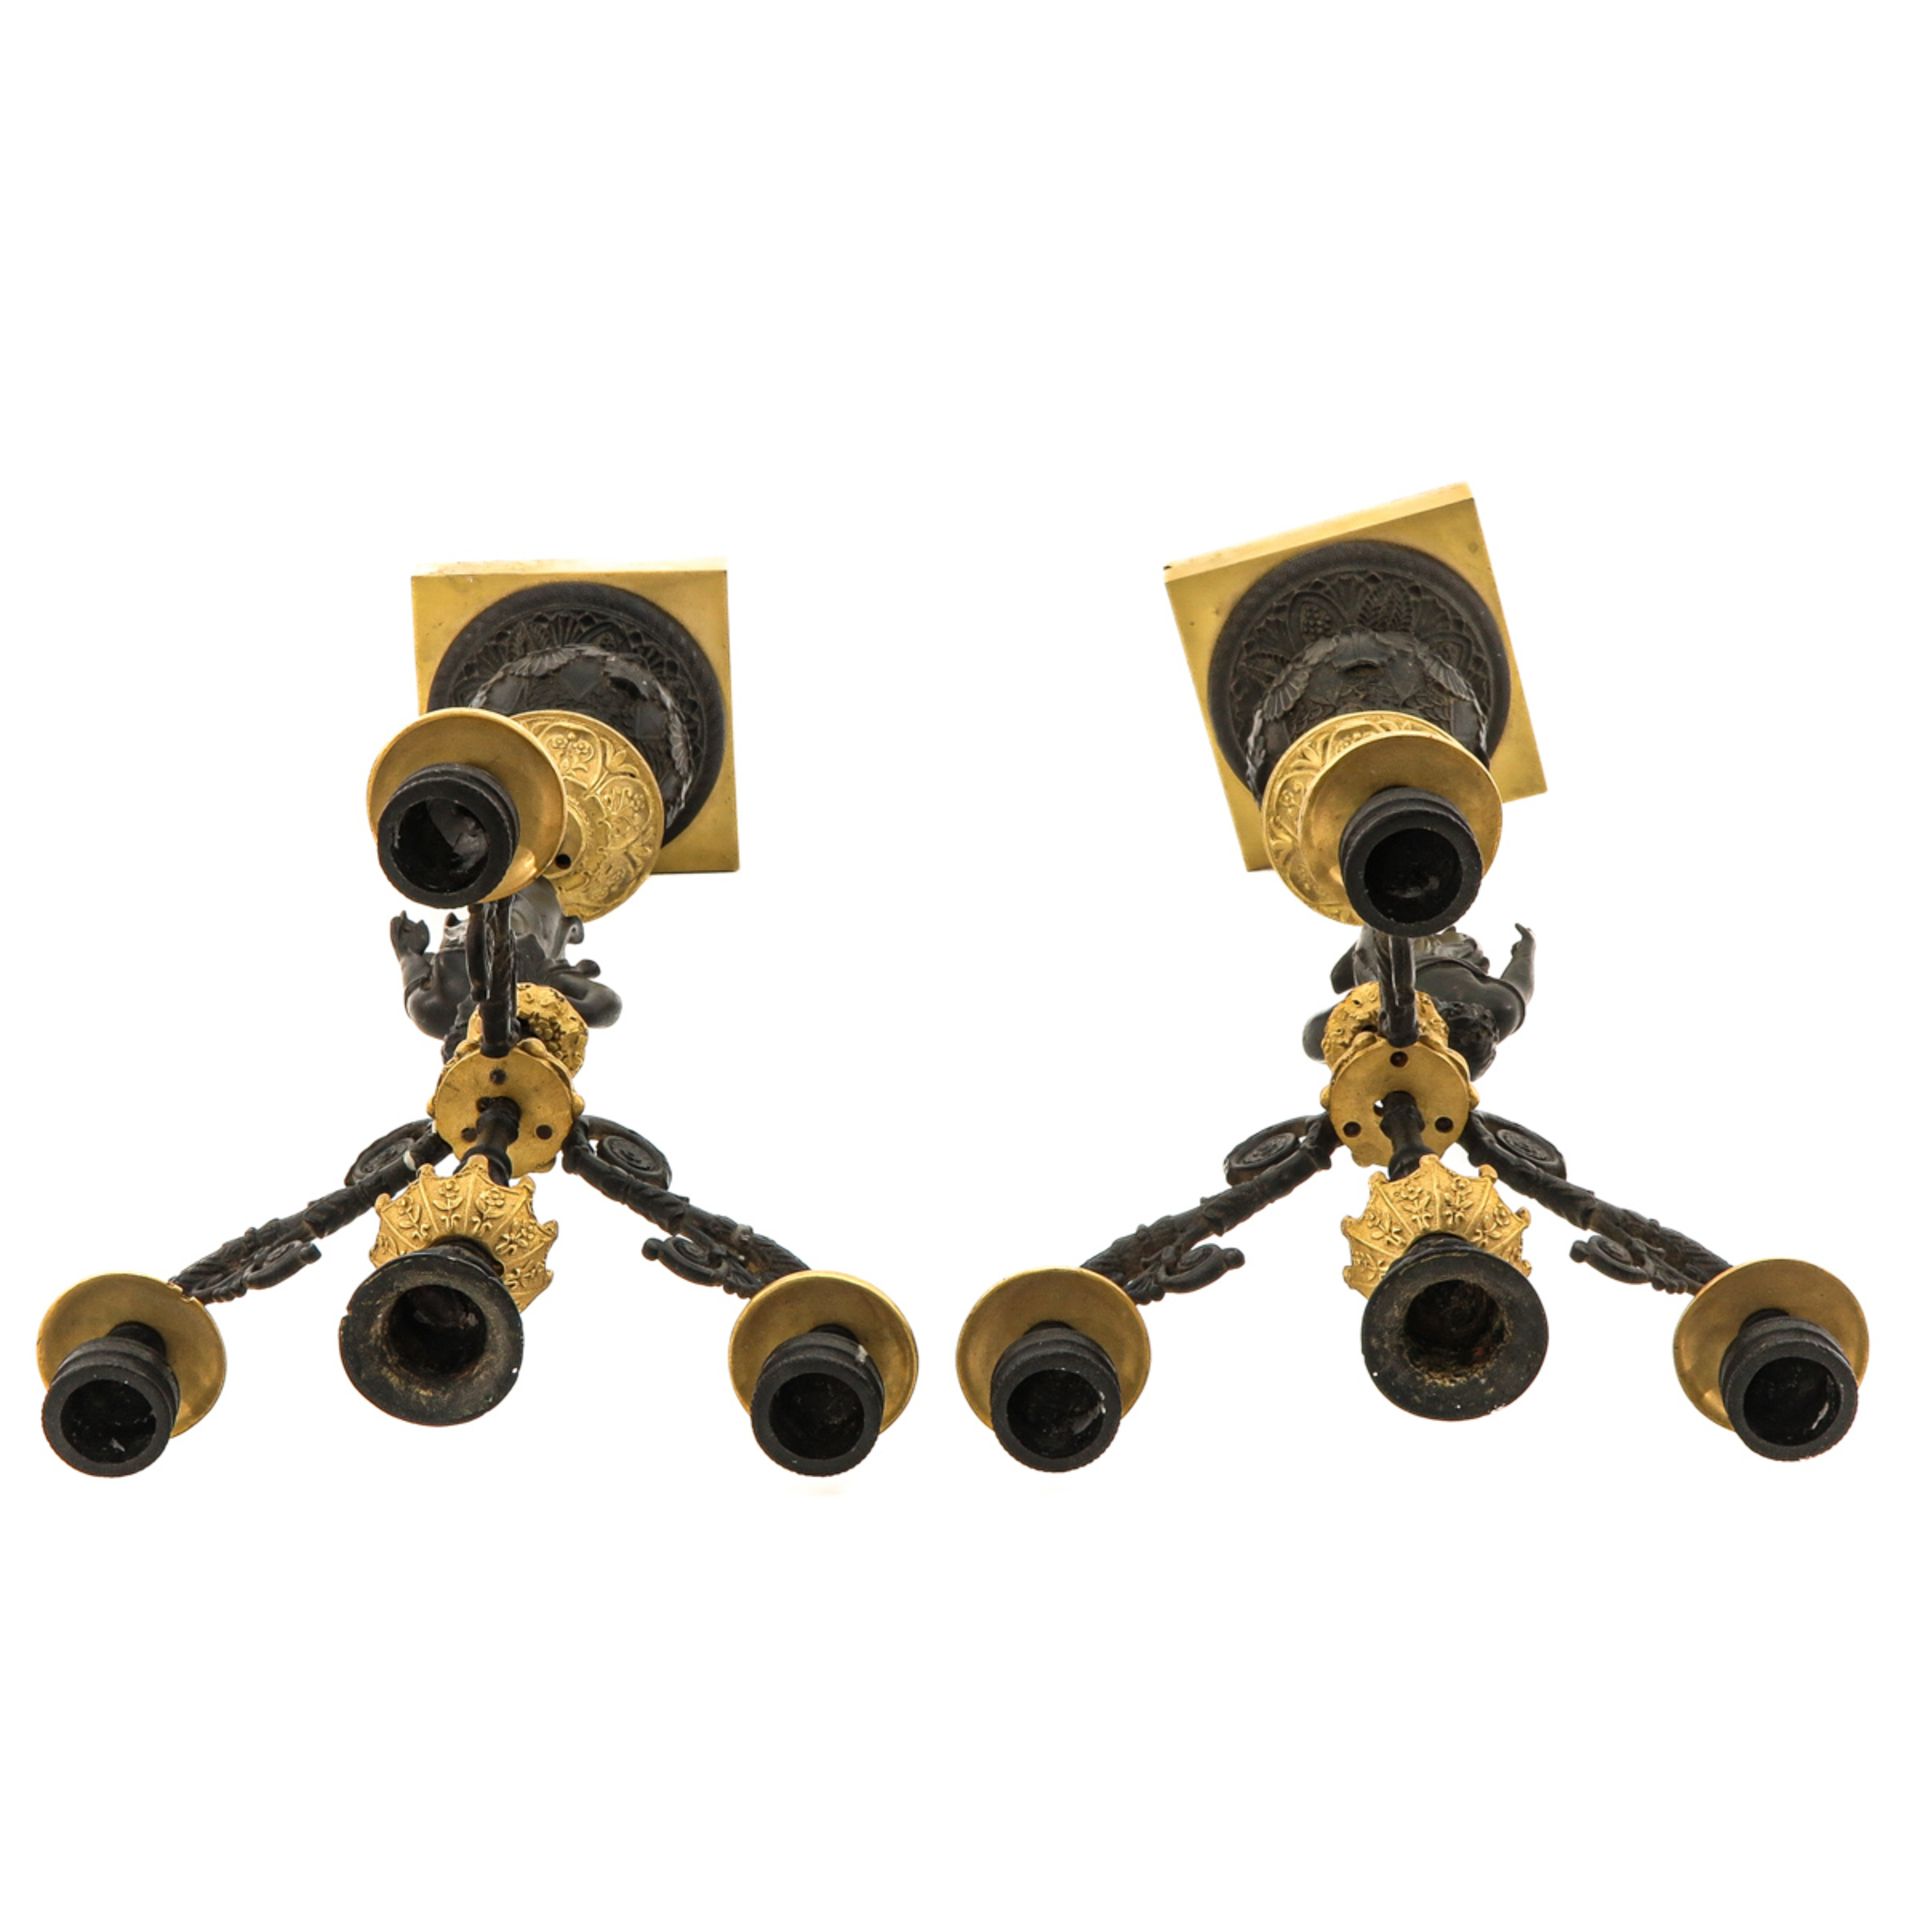 A Pair of 19th Century Candelsticks - Image 5 of 10